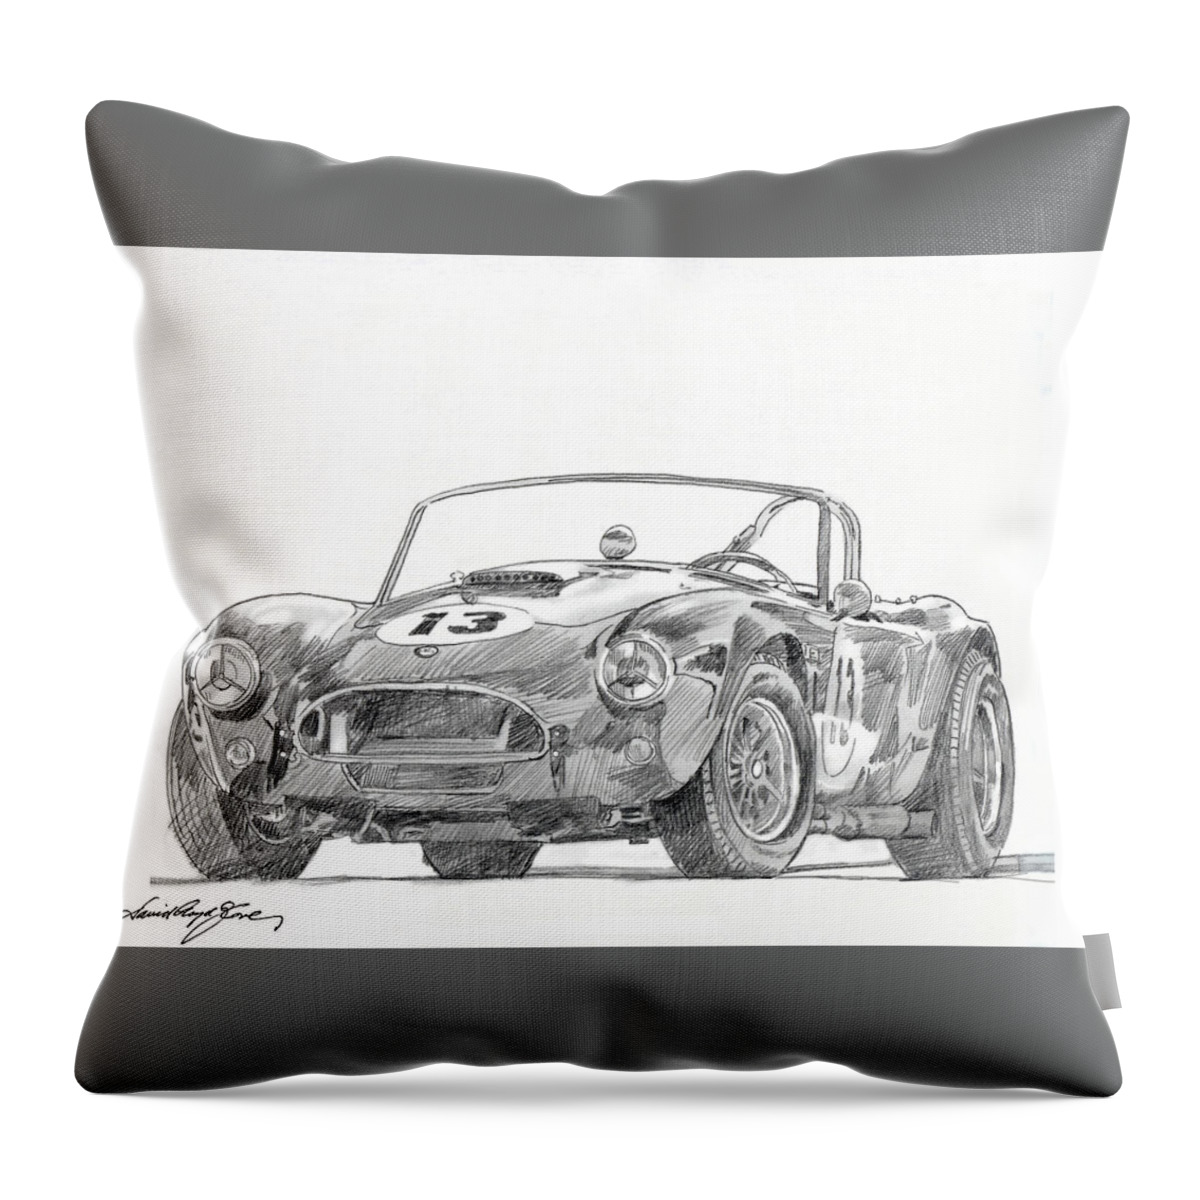 Cobra Throw Pillow featuring the drawing 289 Cobra Competition by David Lloyd Glover